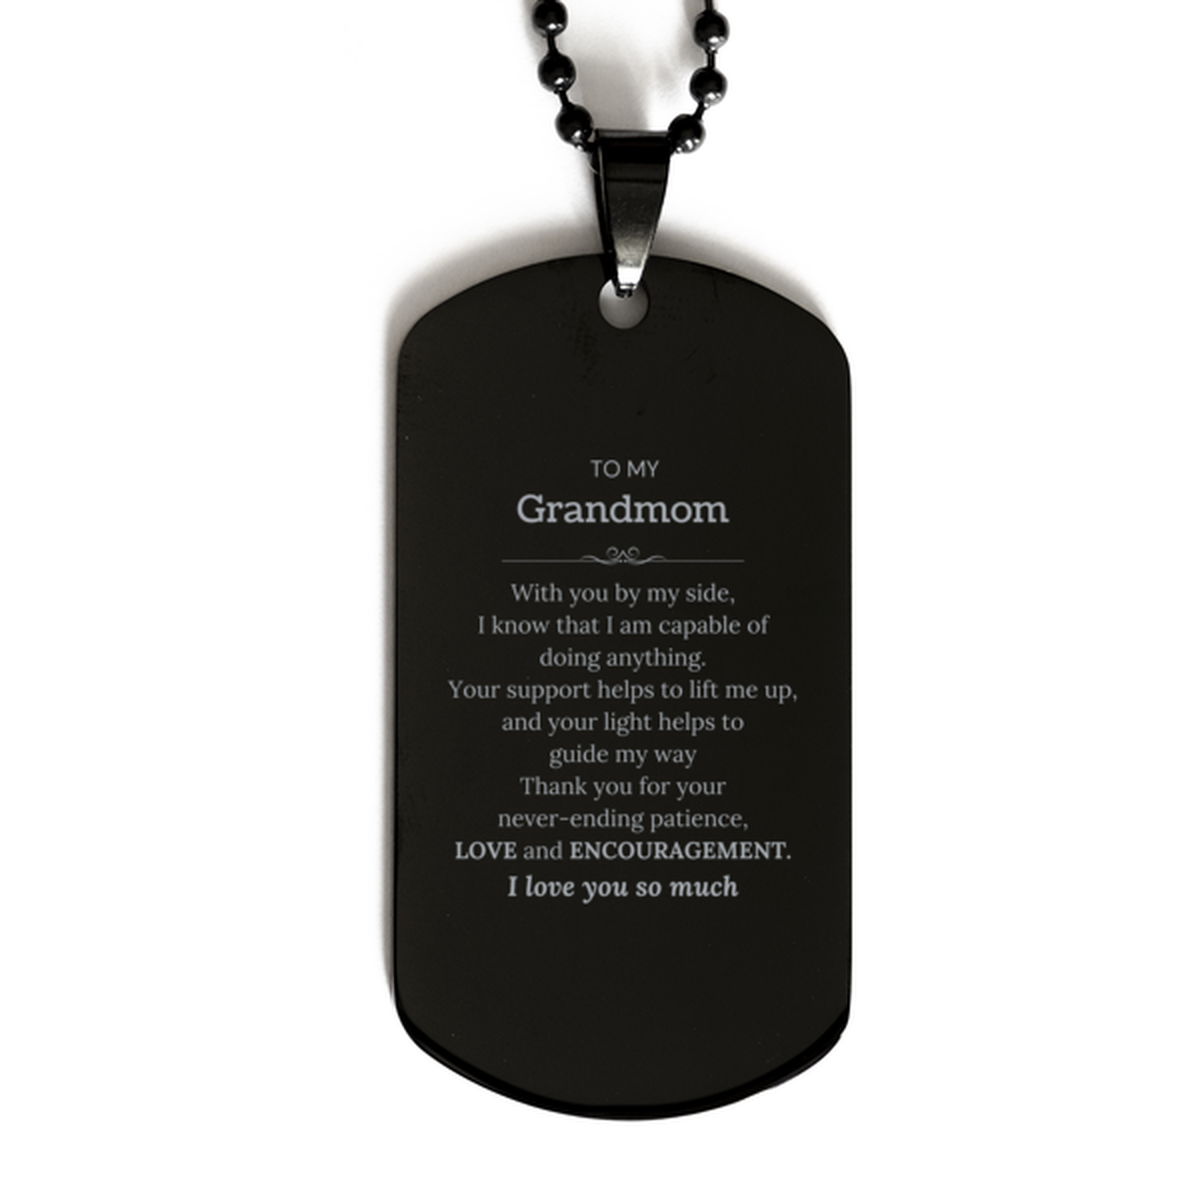 Appreciation Grandmom Black Dog Tag Gifts, To My Grandmom Birthday Christmas Wedding Keepsake Gifts for Grandmom With you by my side, I know that I am capable of doing anything. I love you so much